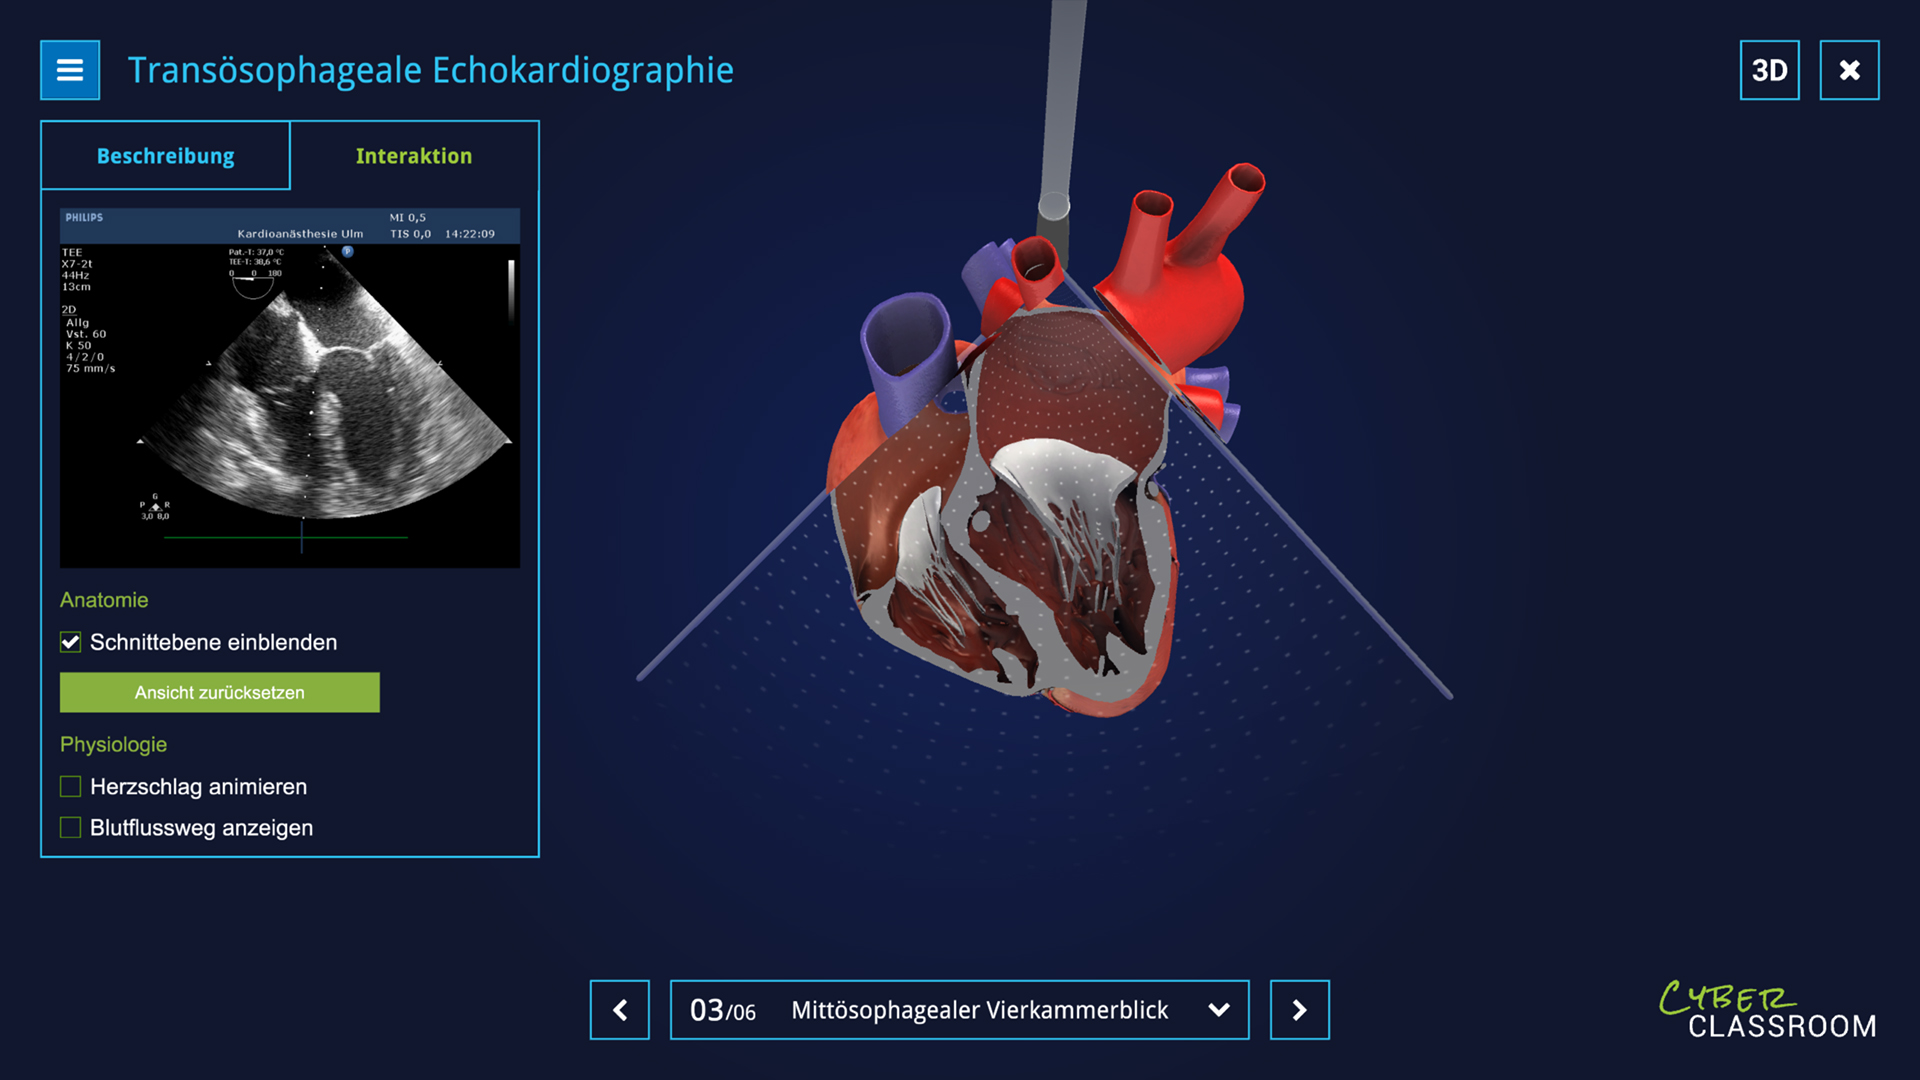 unity learning application of university of ulm heart virtual cutted